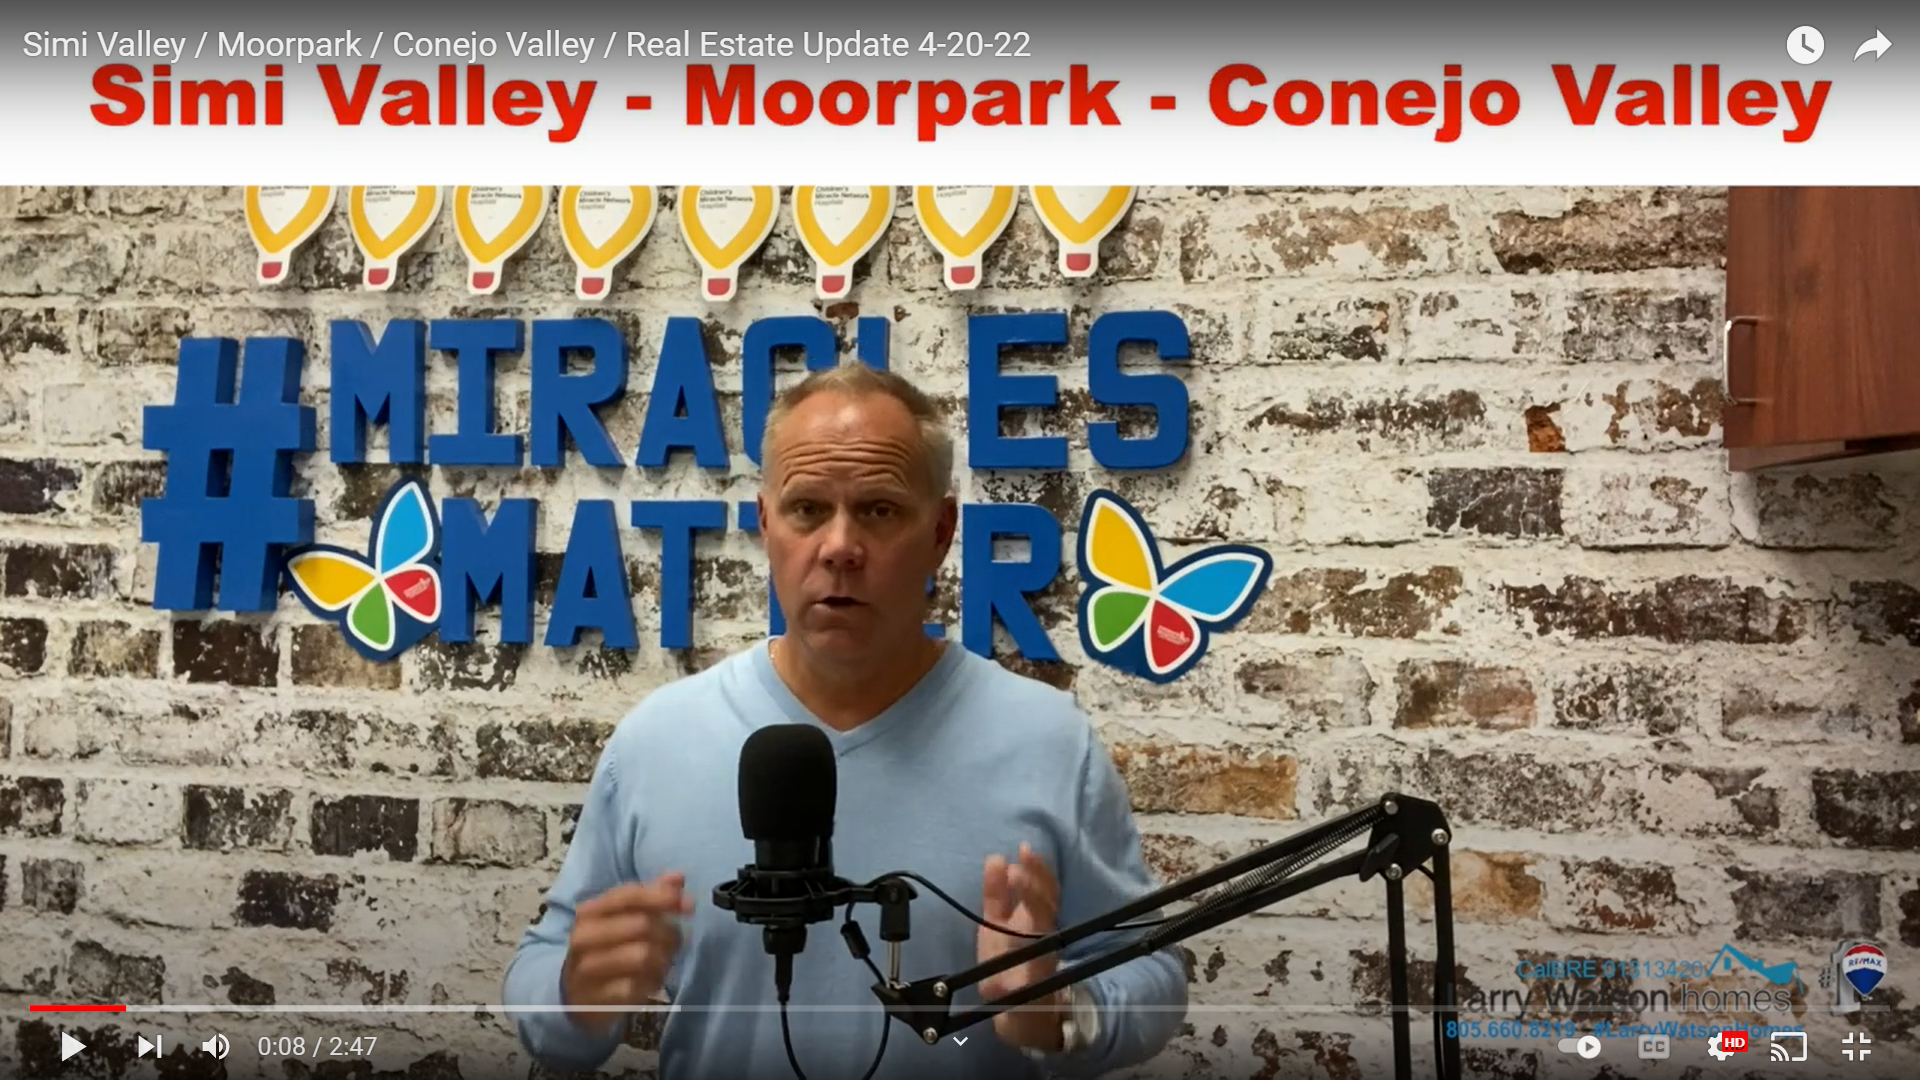 Simi Valley / Moorpark / Conejo Valley / Real Estate Update 4-20-22